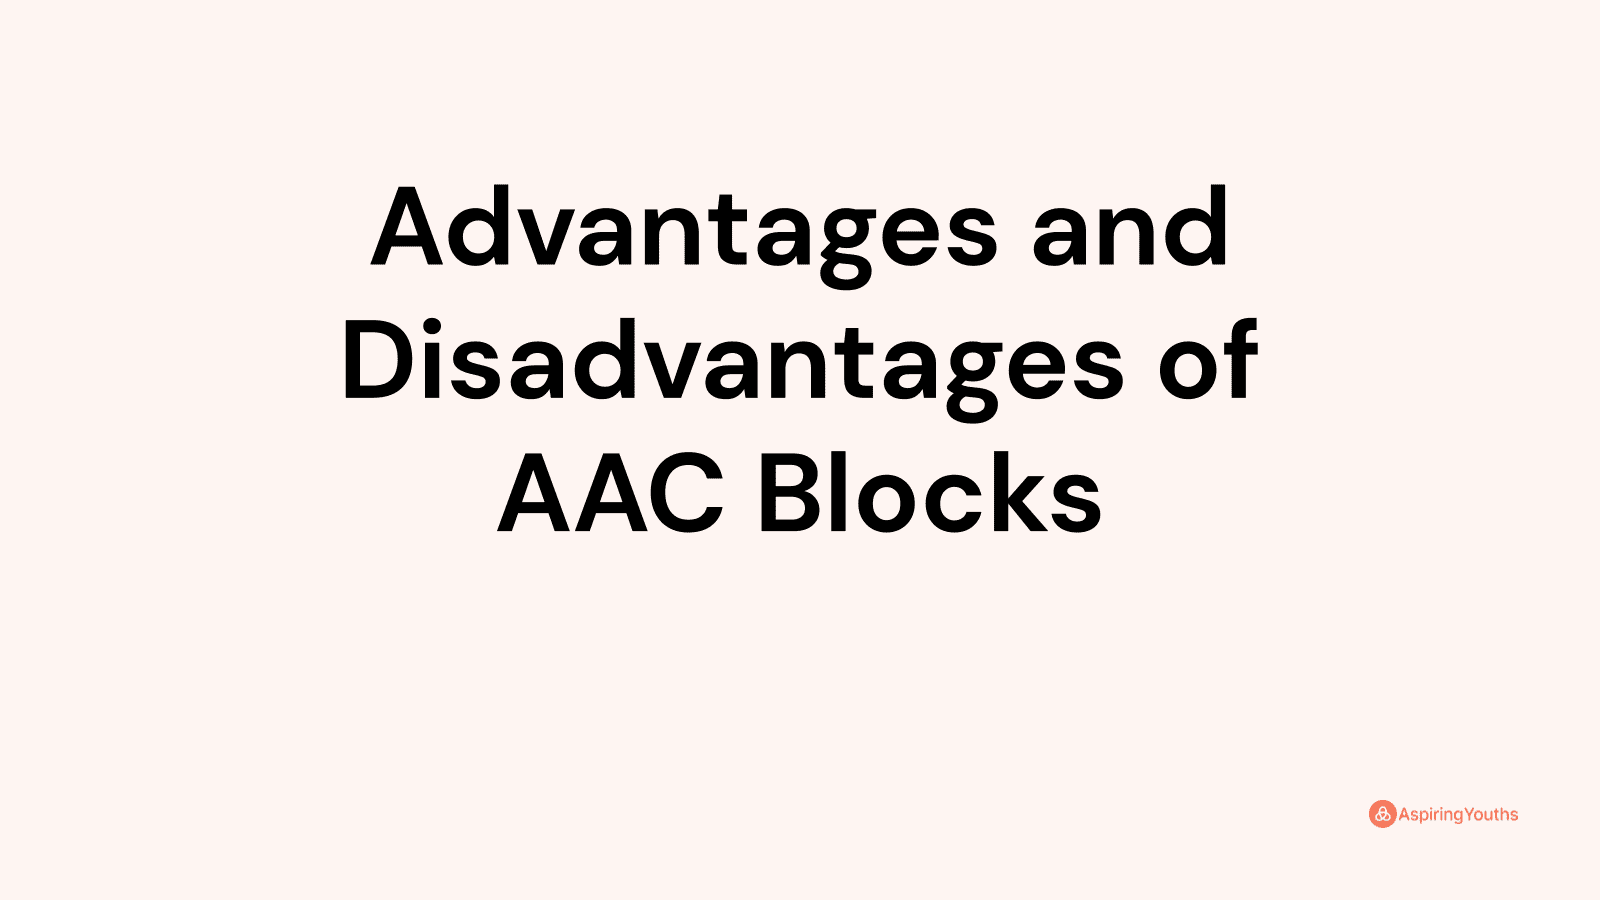 Advantages and disadvantages of AAC Blocks